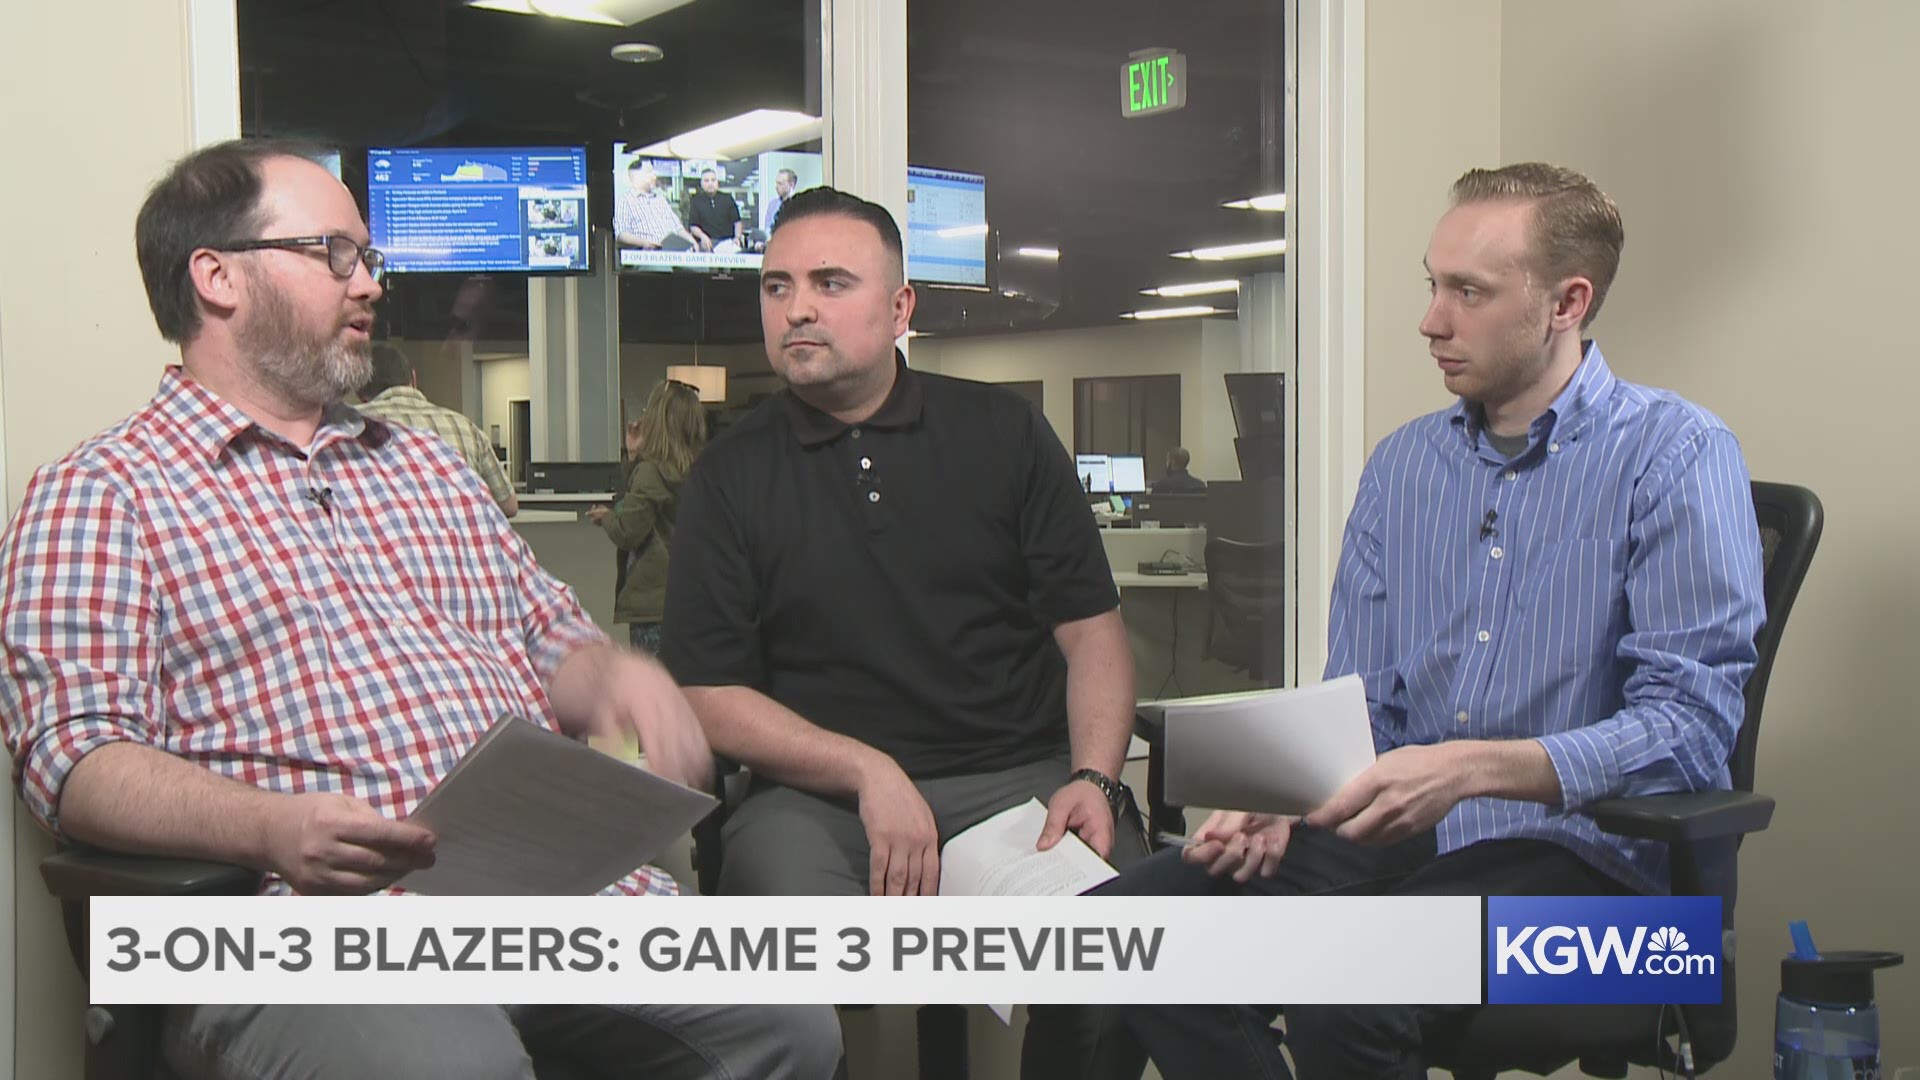 KGW's Jared Cowley, Orlando Sanchez and Nate Hanson debate whether Blazers coach Terry Stotts should make significant changes to the starting lineup with the team down 0-2.